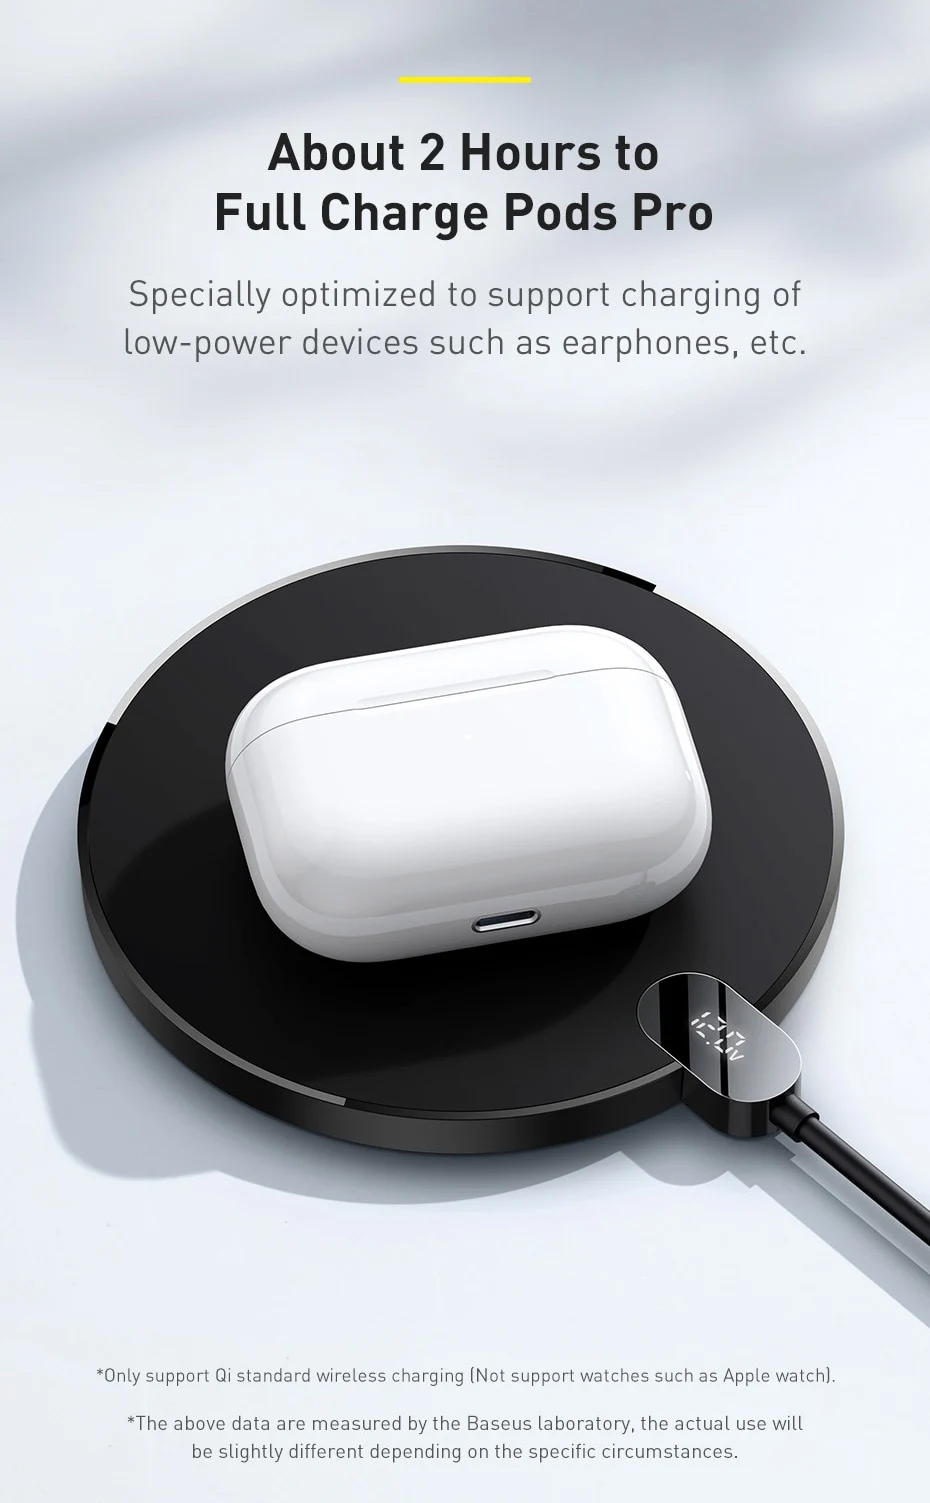 About 2 Hours to Full Charge Pods Pro Specially optimized to support charging of low-power devices such as earphones, etc.